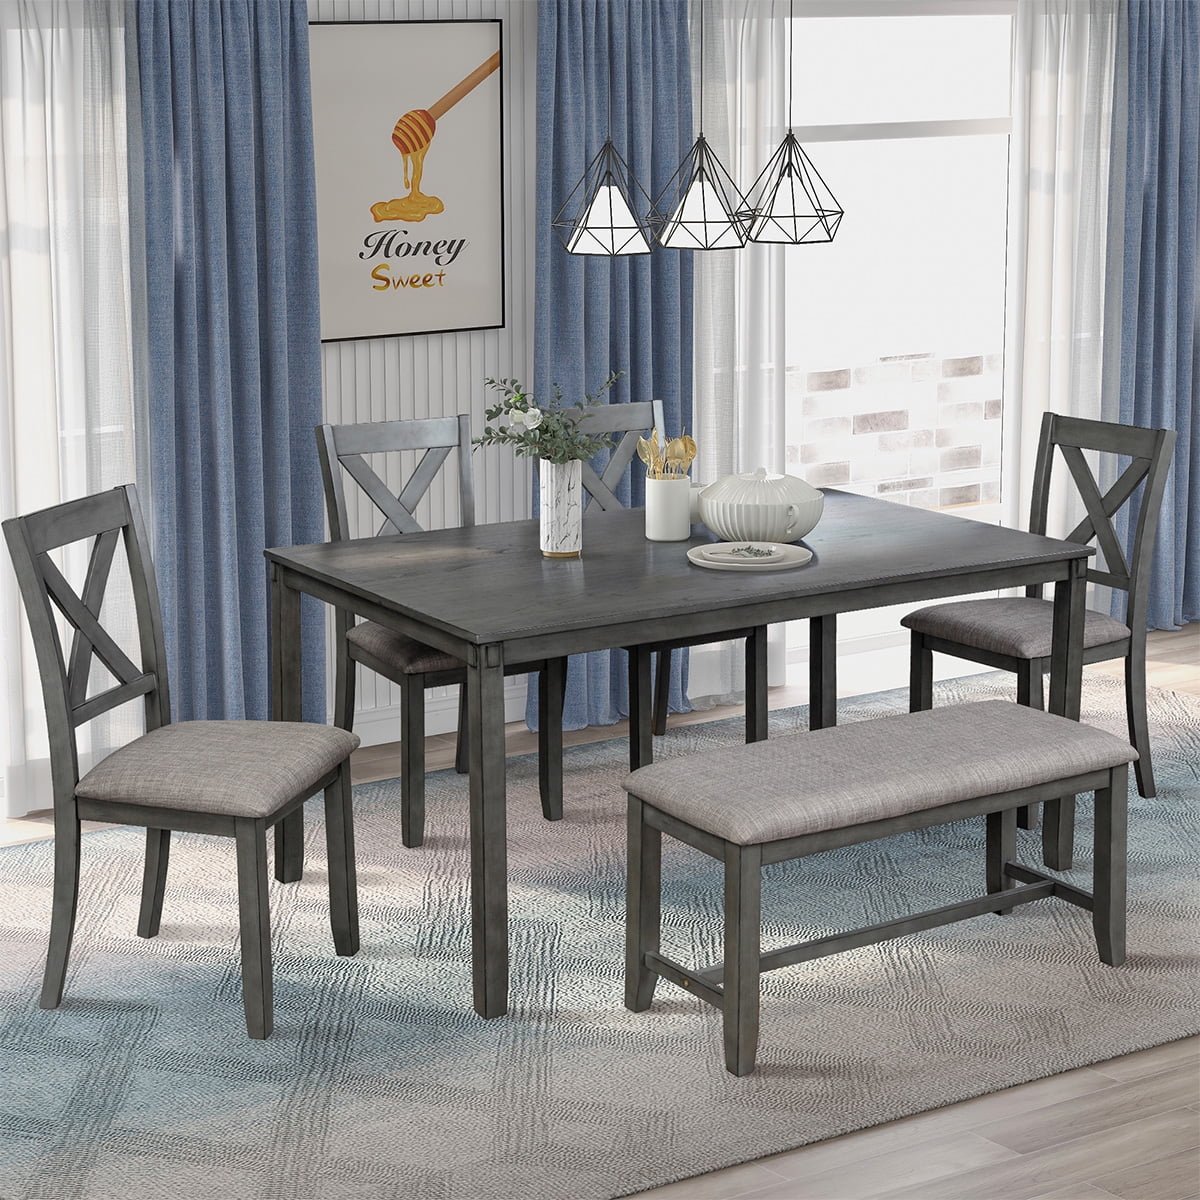 SENTERN 6-Piece Dining Table Set with Rectangular Table, Bench, 4 ...